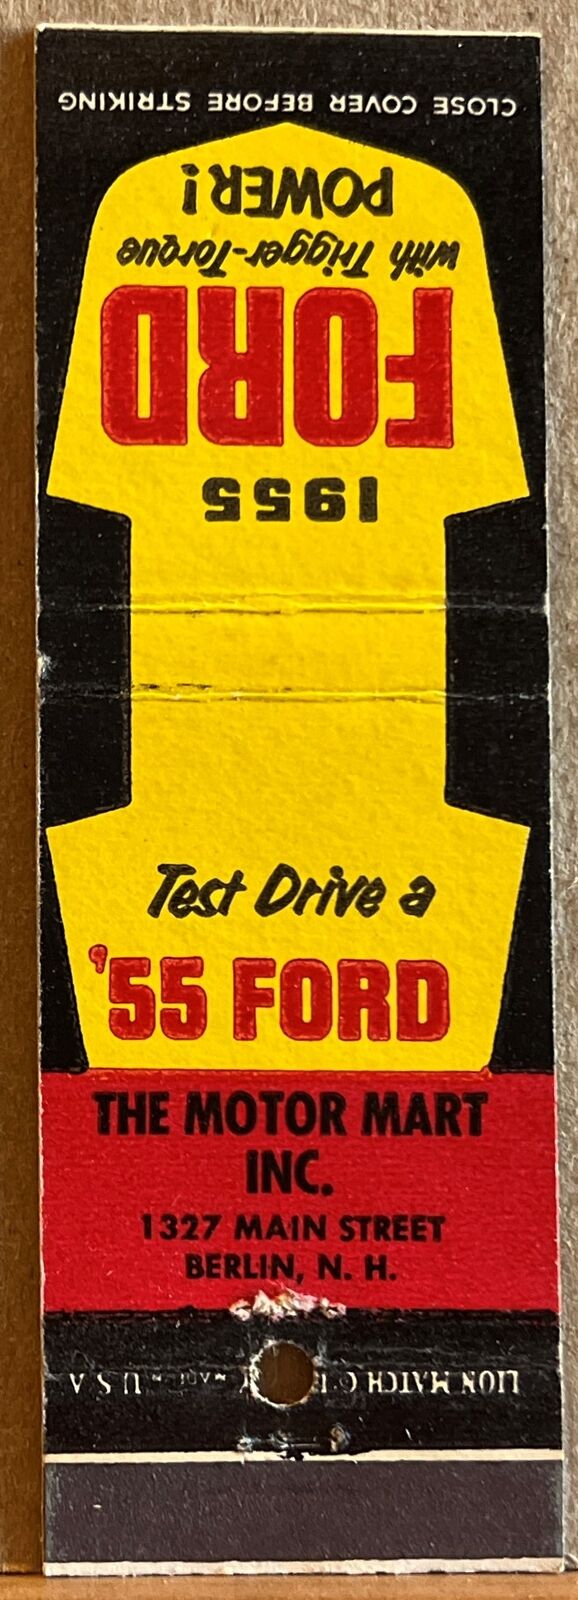 The Motor Mart Berlin NH New Hampshire Test Drive a '55 Ford Matchbook Cover